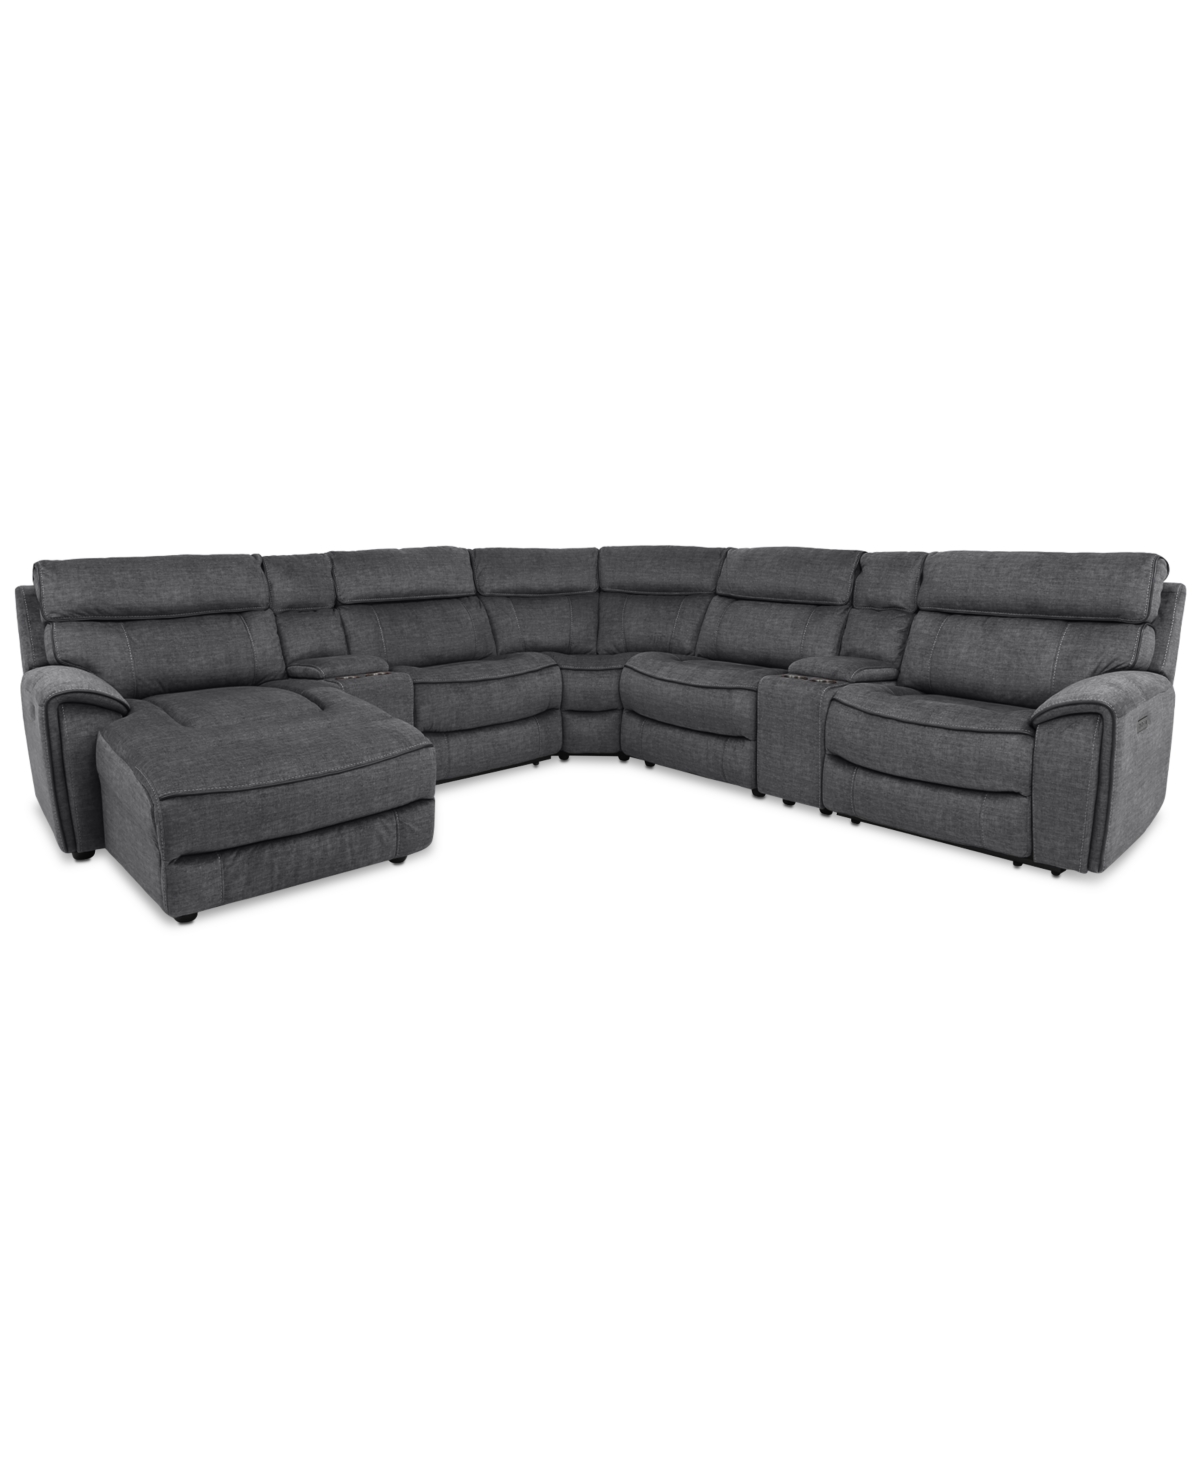 Furniture Hutchenson 7-pc. Fabric Chaise Sectional With 3 Power Recliners And 2 Consoles In Charcoal Moss